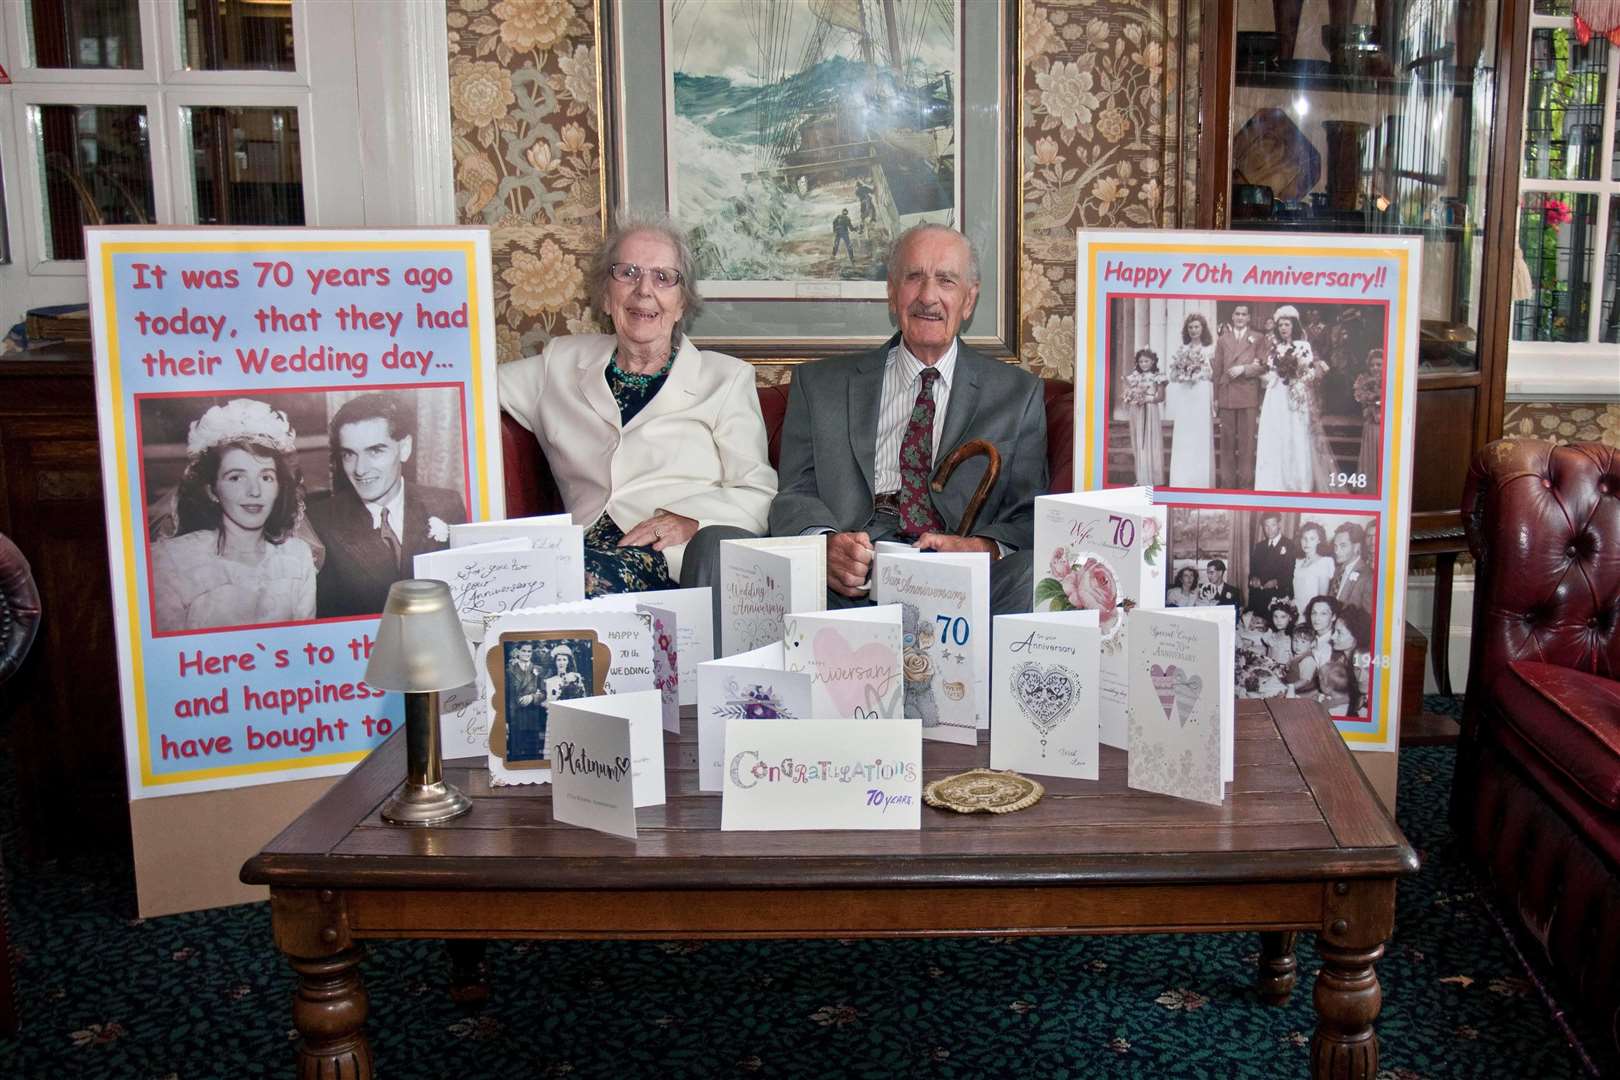 The couple celebrated their 70th wedding anniversary